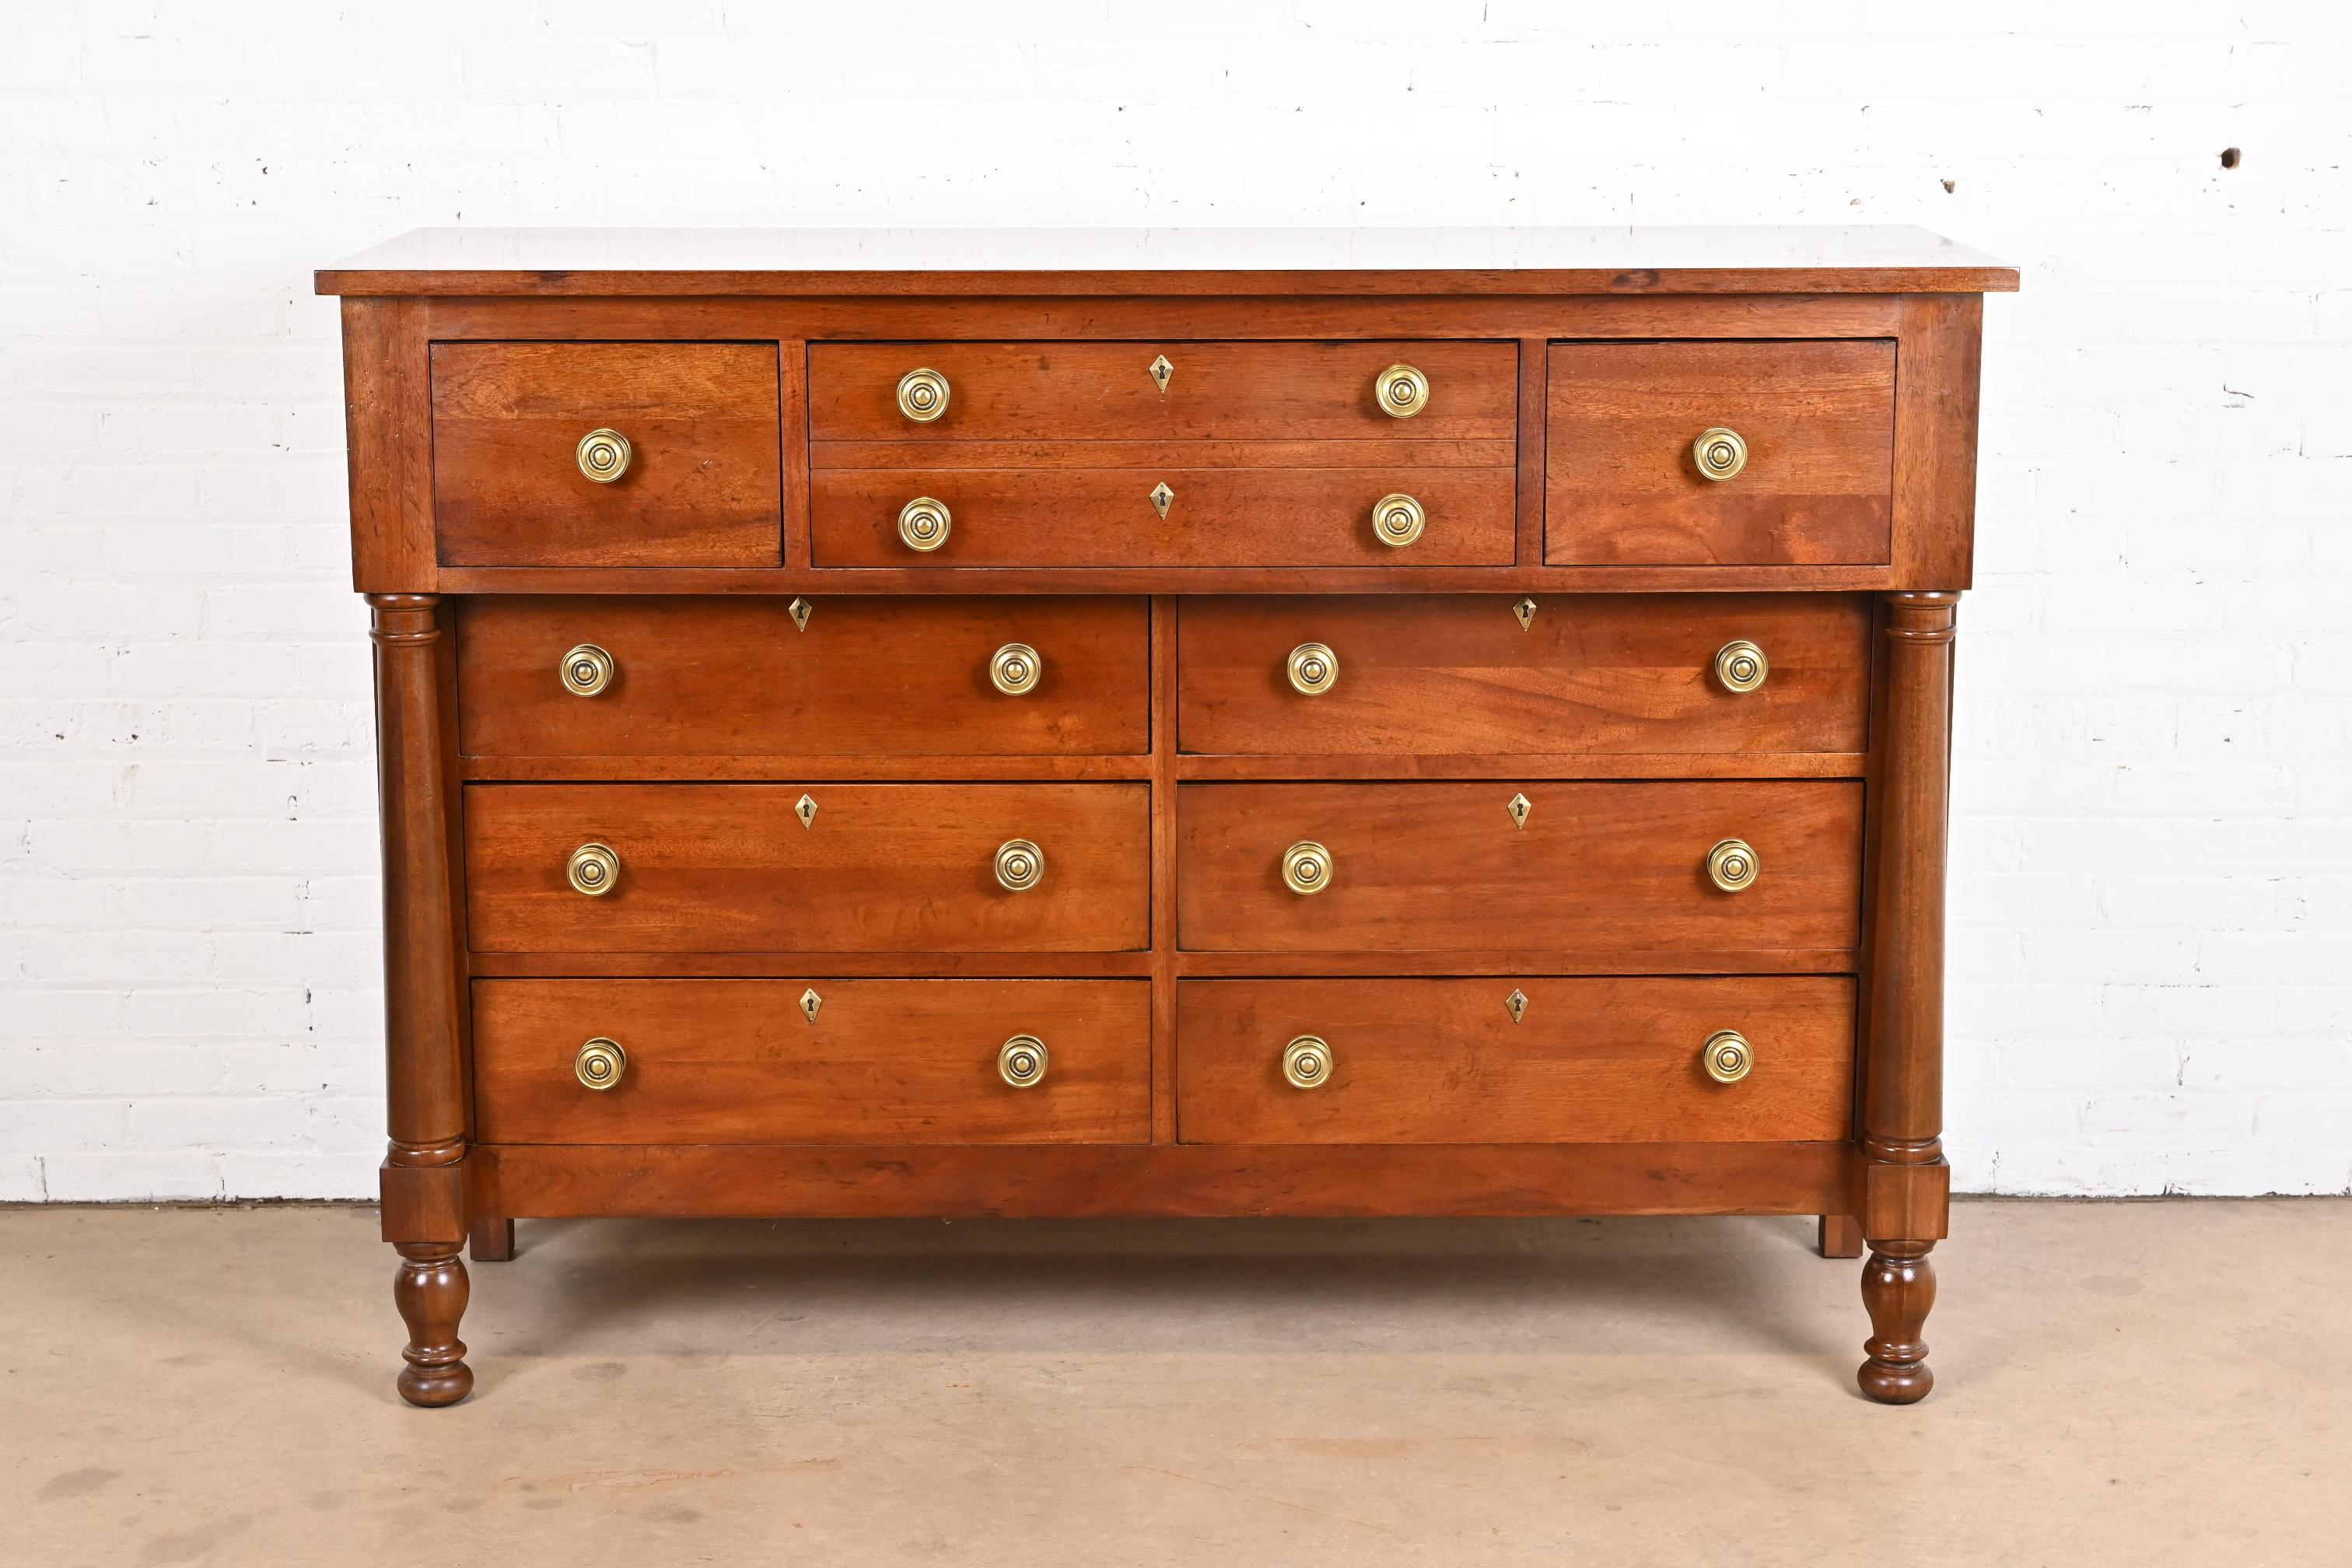 An exceptional French Empire style nine-drawer dresser or chest of drawers

By Henredon

USA, late 20th century

Carved mahogany, with original brass hardware.

Measures: 65